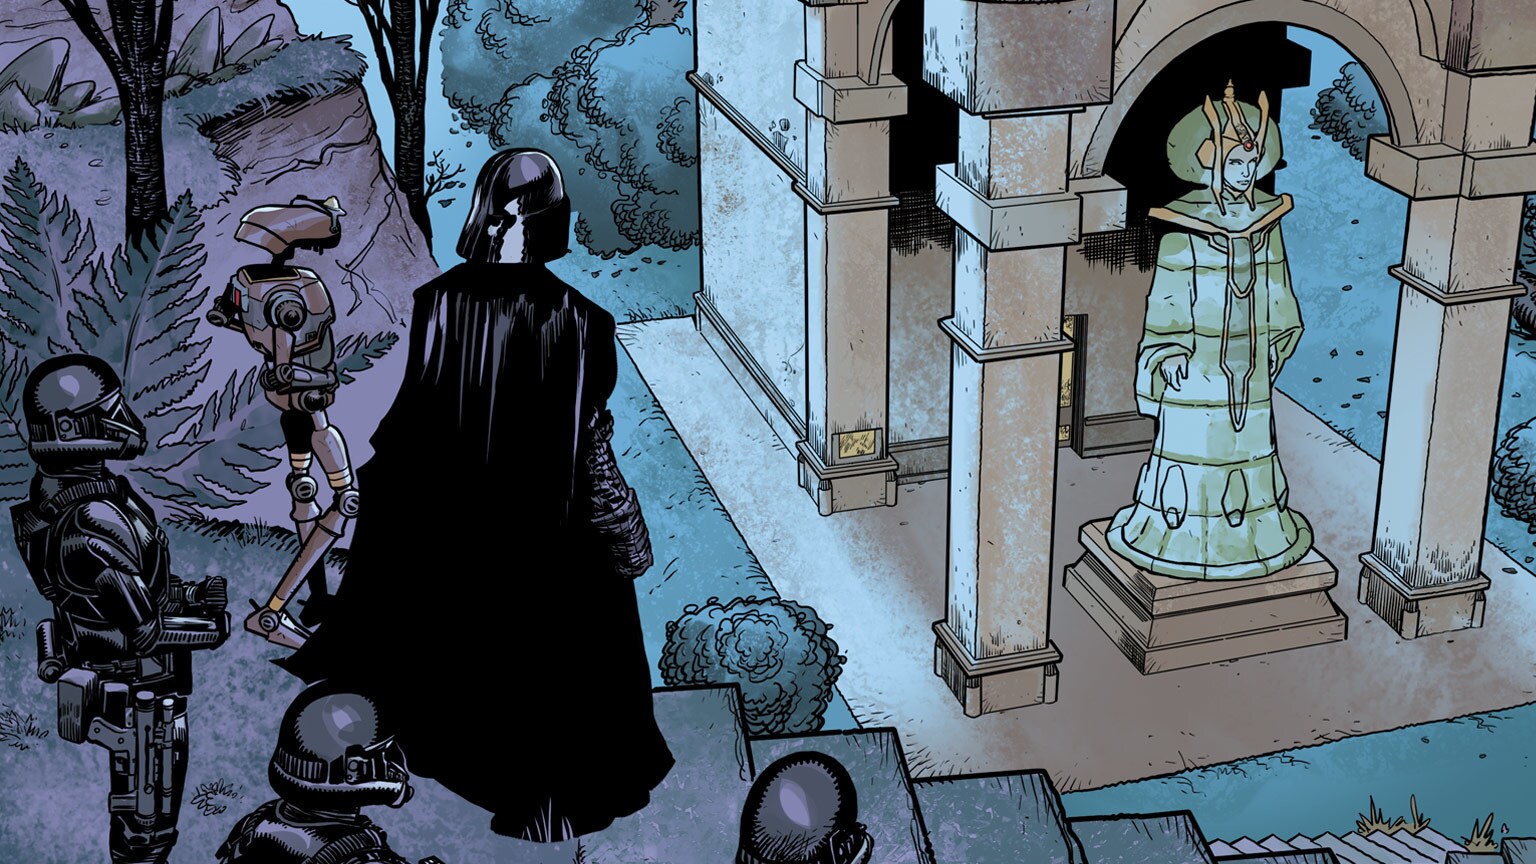 The Sith Lord’s Quest Leads to Padmé’s Tomb in Darth Vader #4 - Exclusive